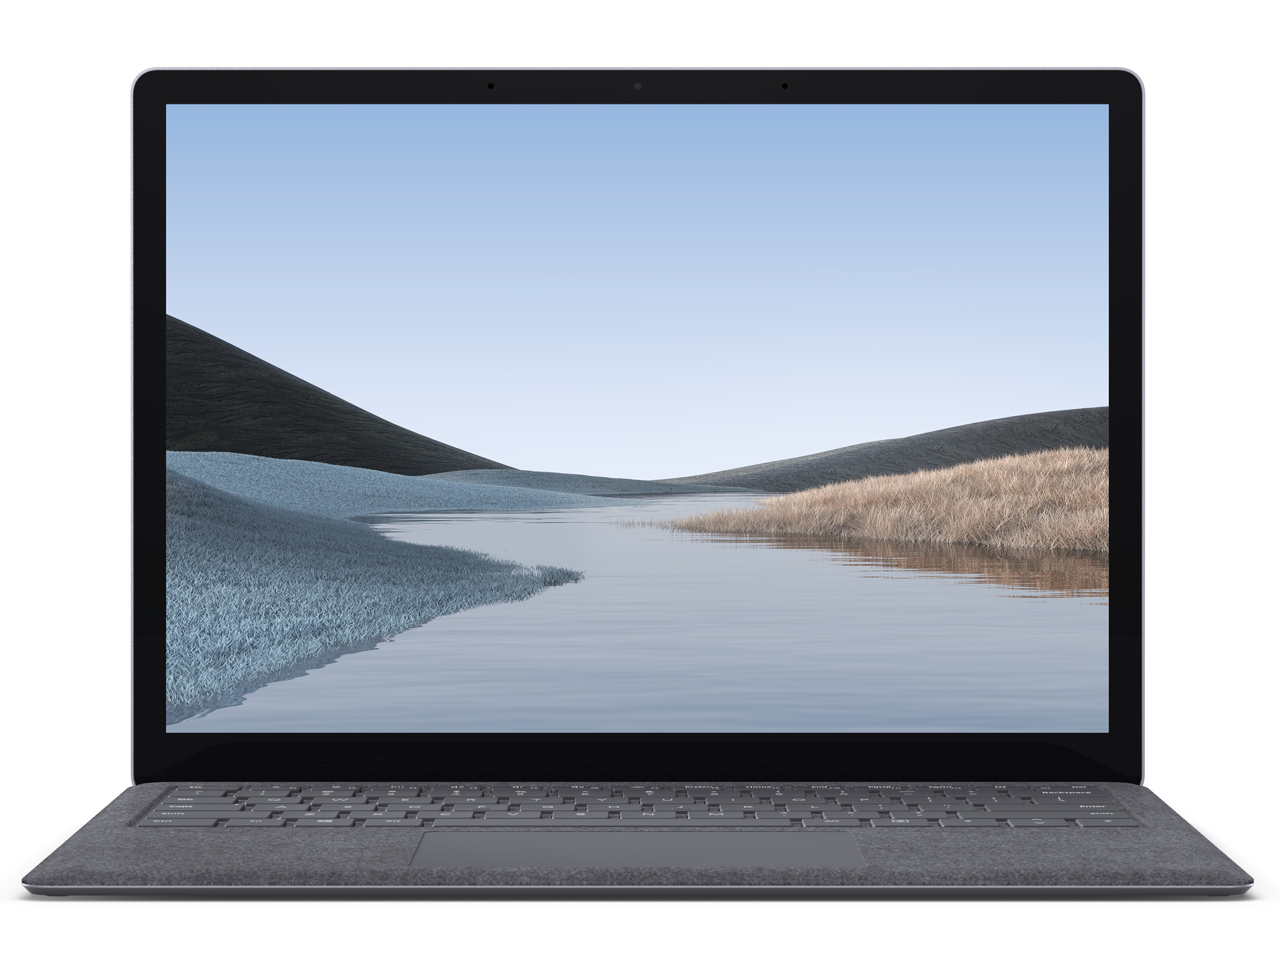 Surface Laptop 3 13.5インチ/Core i7/メモリ16GB/512GB SSD/Office Home and Business 2019付モデル